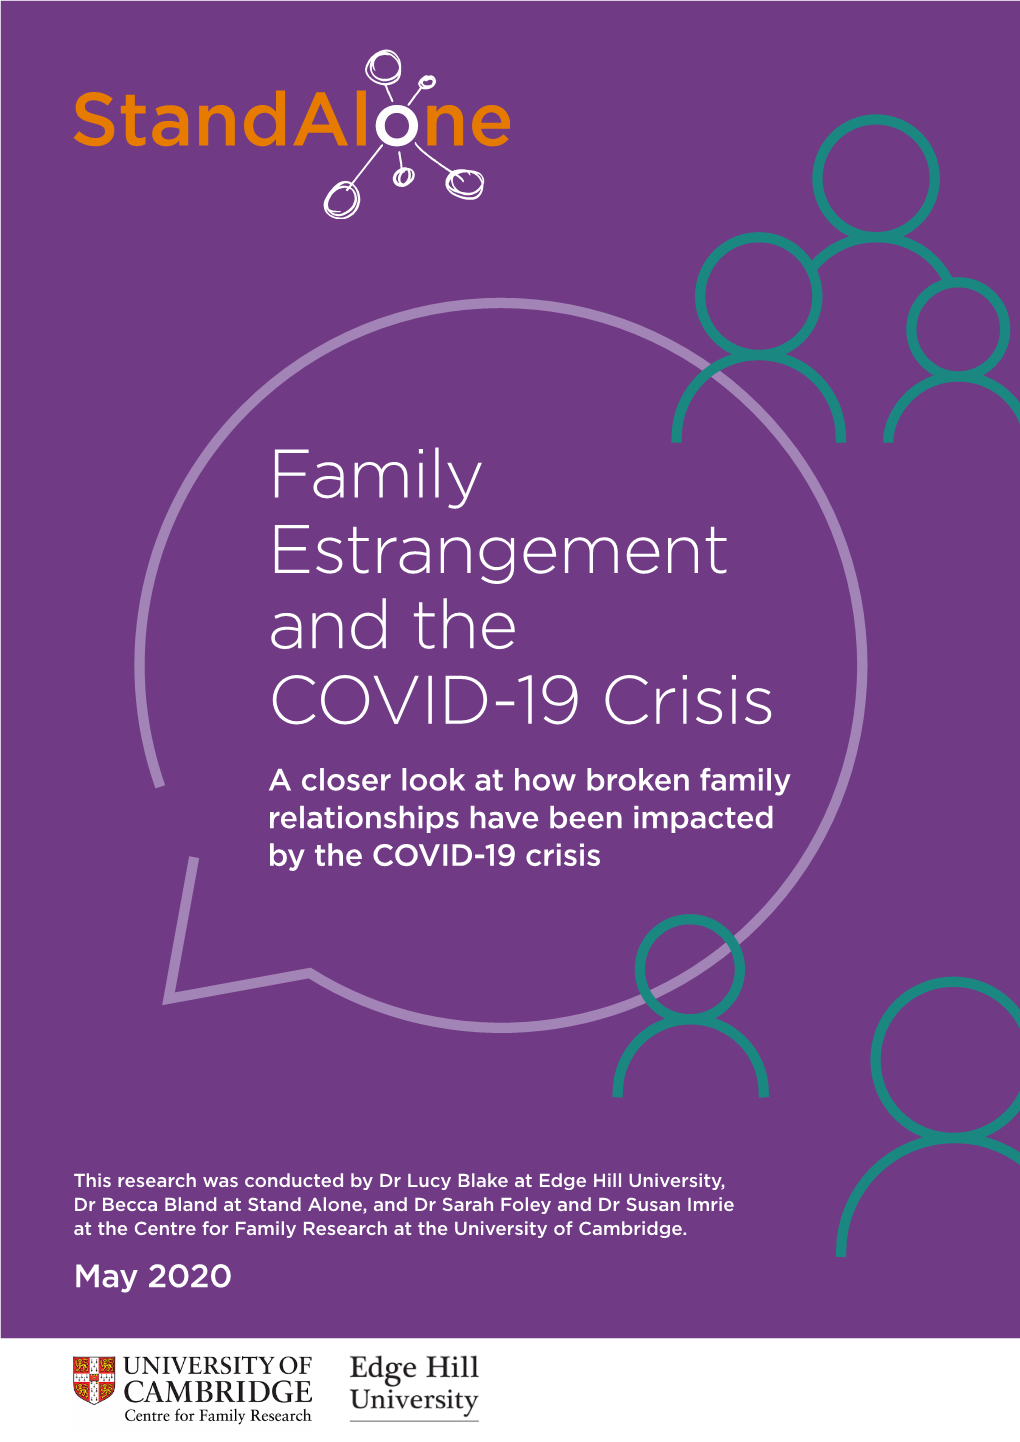 Family Estrangement and the COVID-19 Crisis a Closer Look at How Broken Family Relationships Have Been Impacted by the COVID-19 Crisis